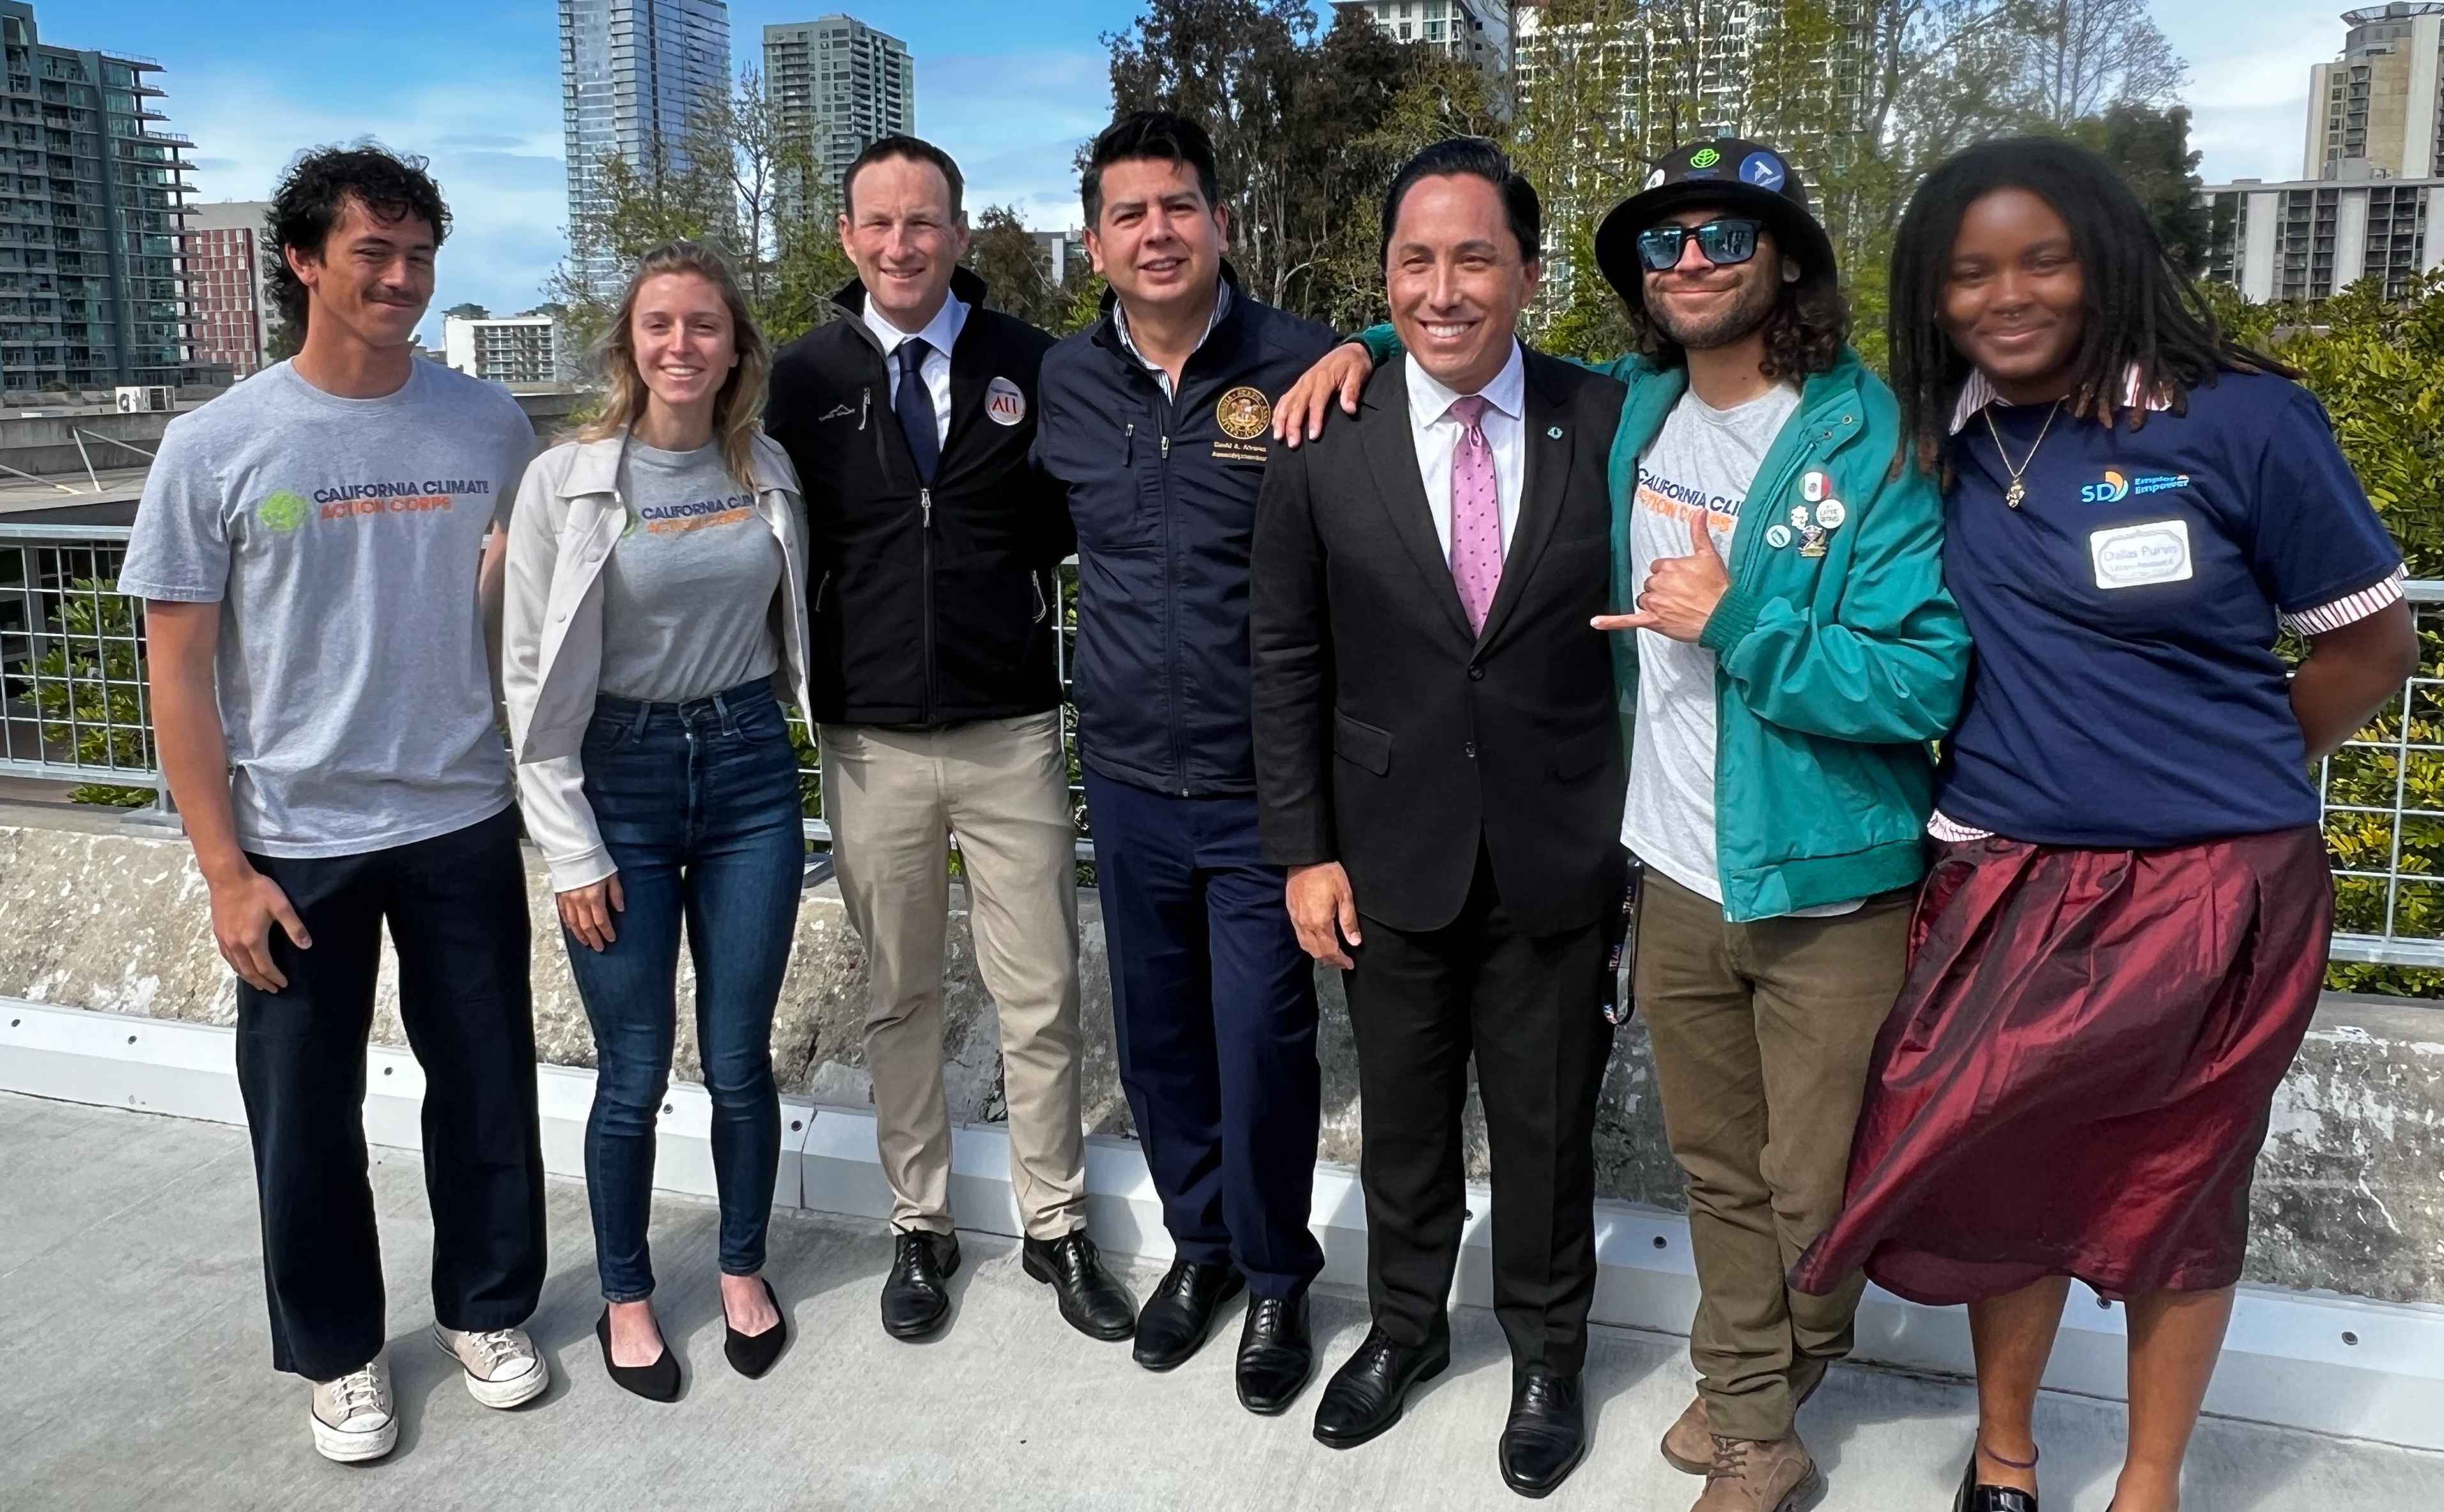 California Chief Service Officer Josh Fryday, Mayor Todd Gloria, Assemblymember David Alvarez and members of the California Service Corps join forces to support recruitment efforts for the California Service Corps in San Diego.